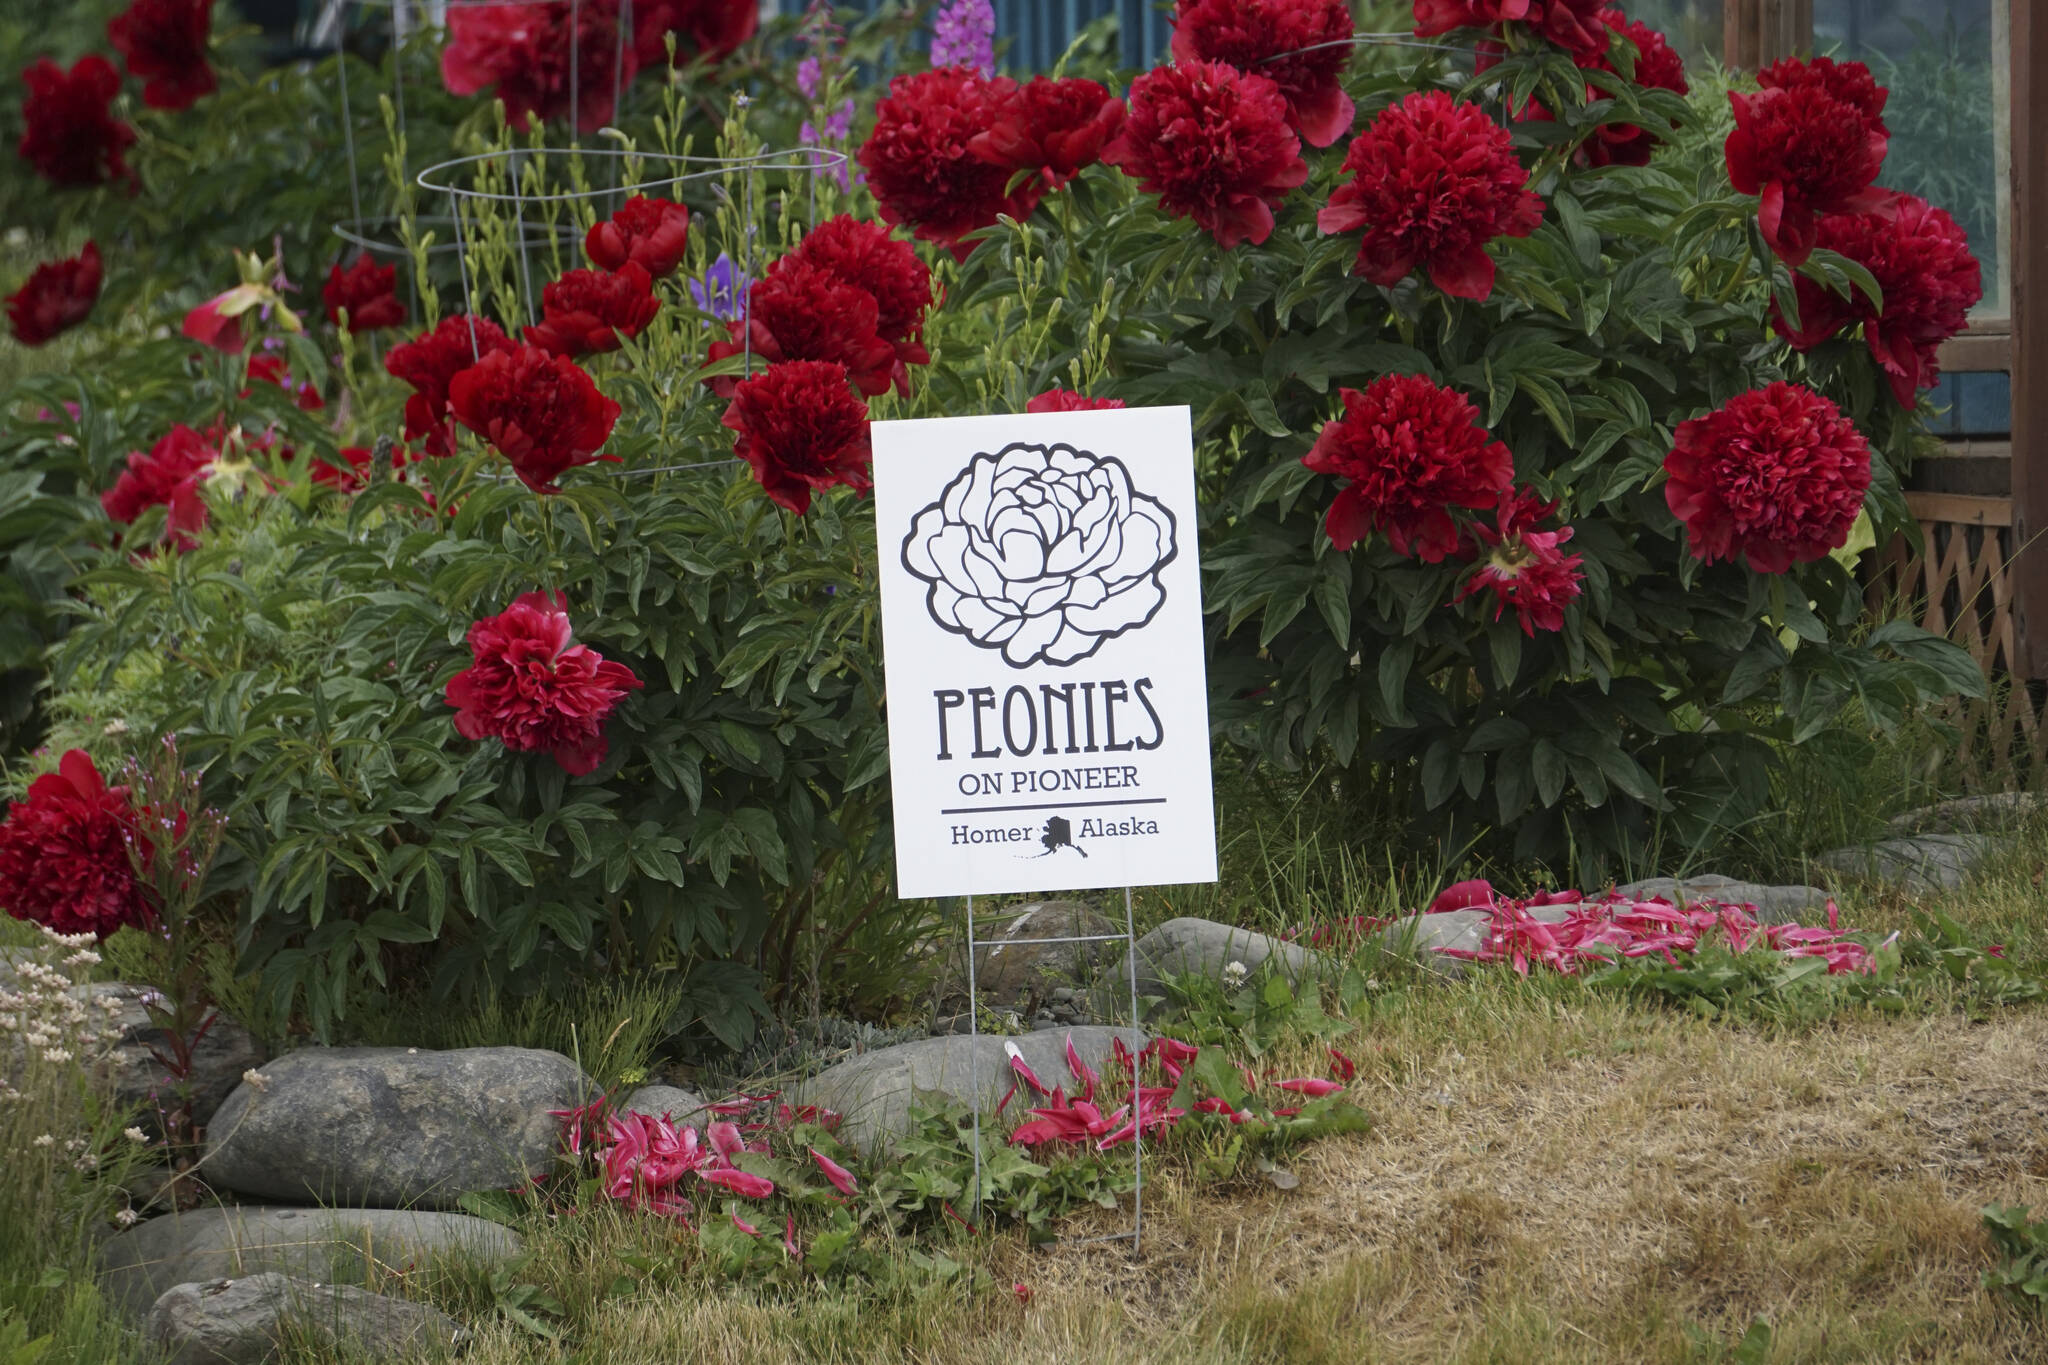 A display of peonies is seen on Pioneer Avenue for the Fourth of July parade on Monday, July 4, 2022, in Homer, Alaska. (Photo by Michael Armstrong/Homer News)